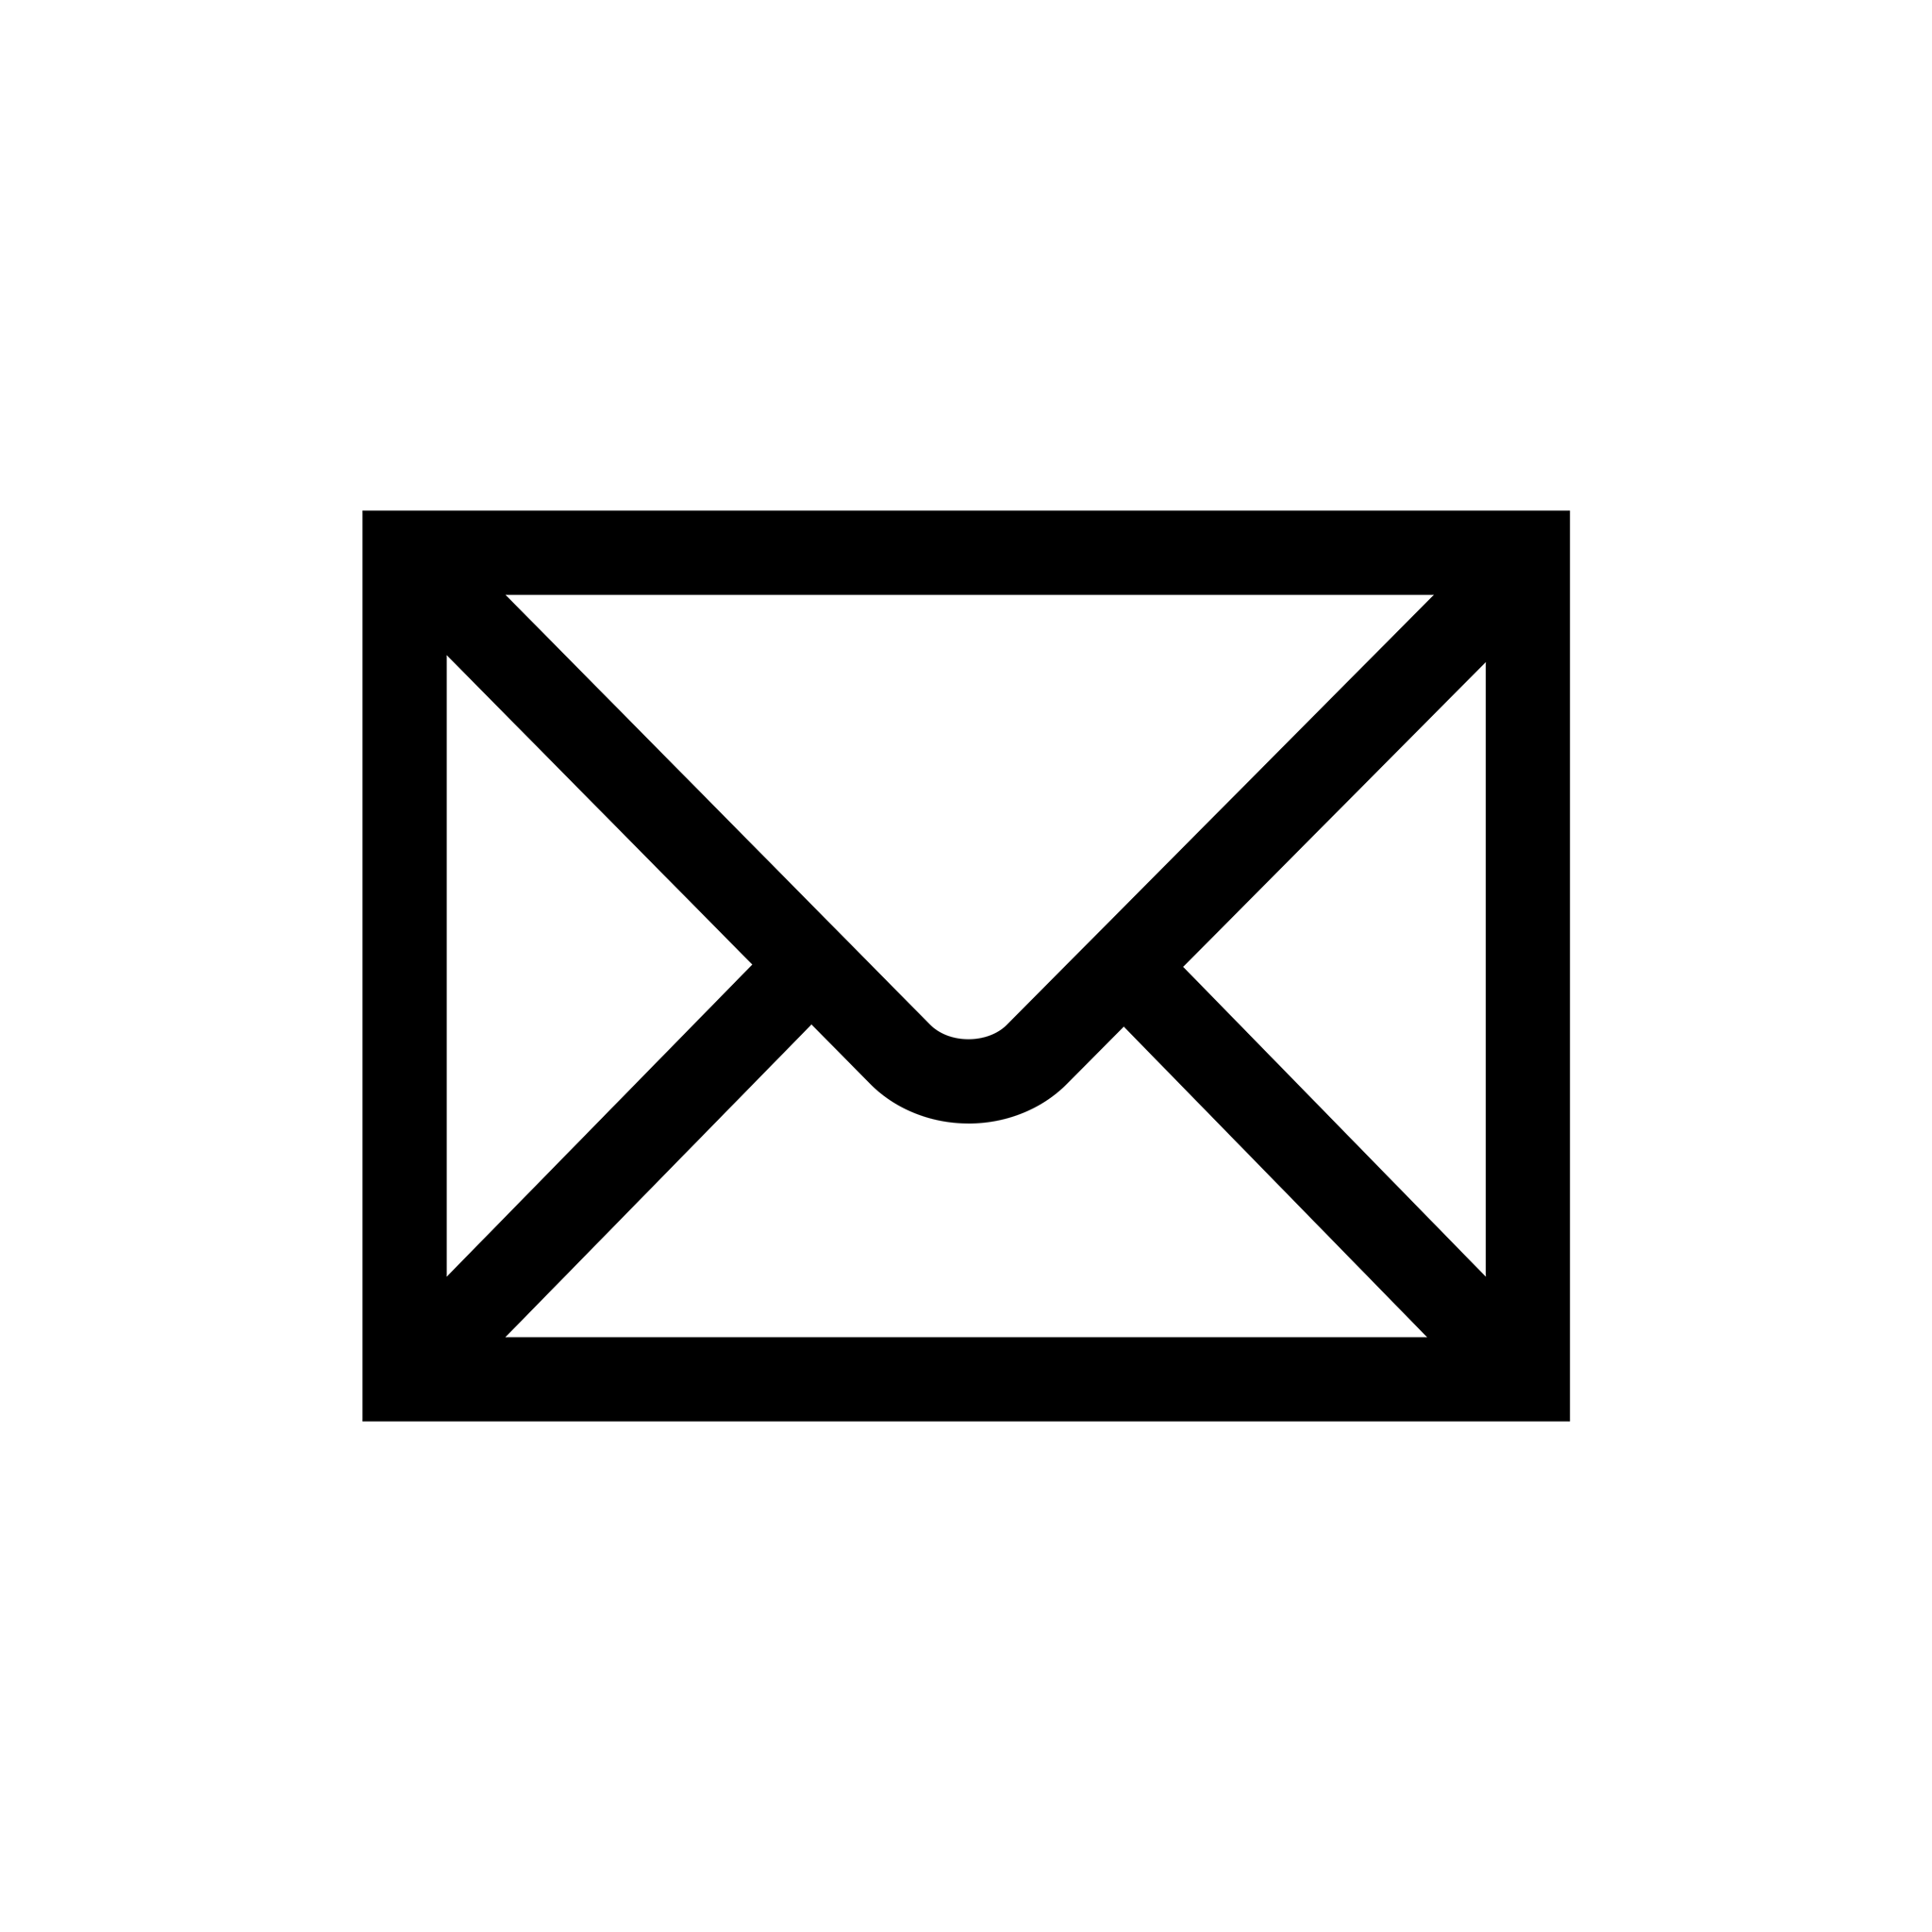 Email filled closed envelope - Free interface icons